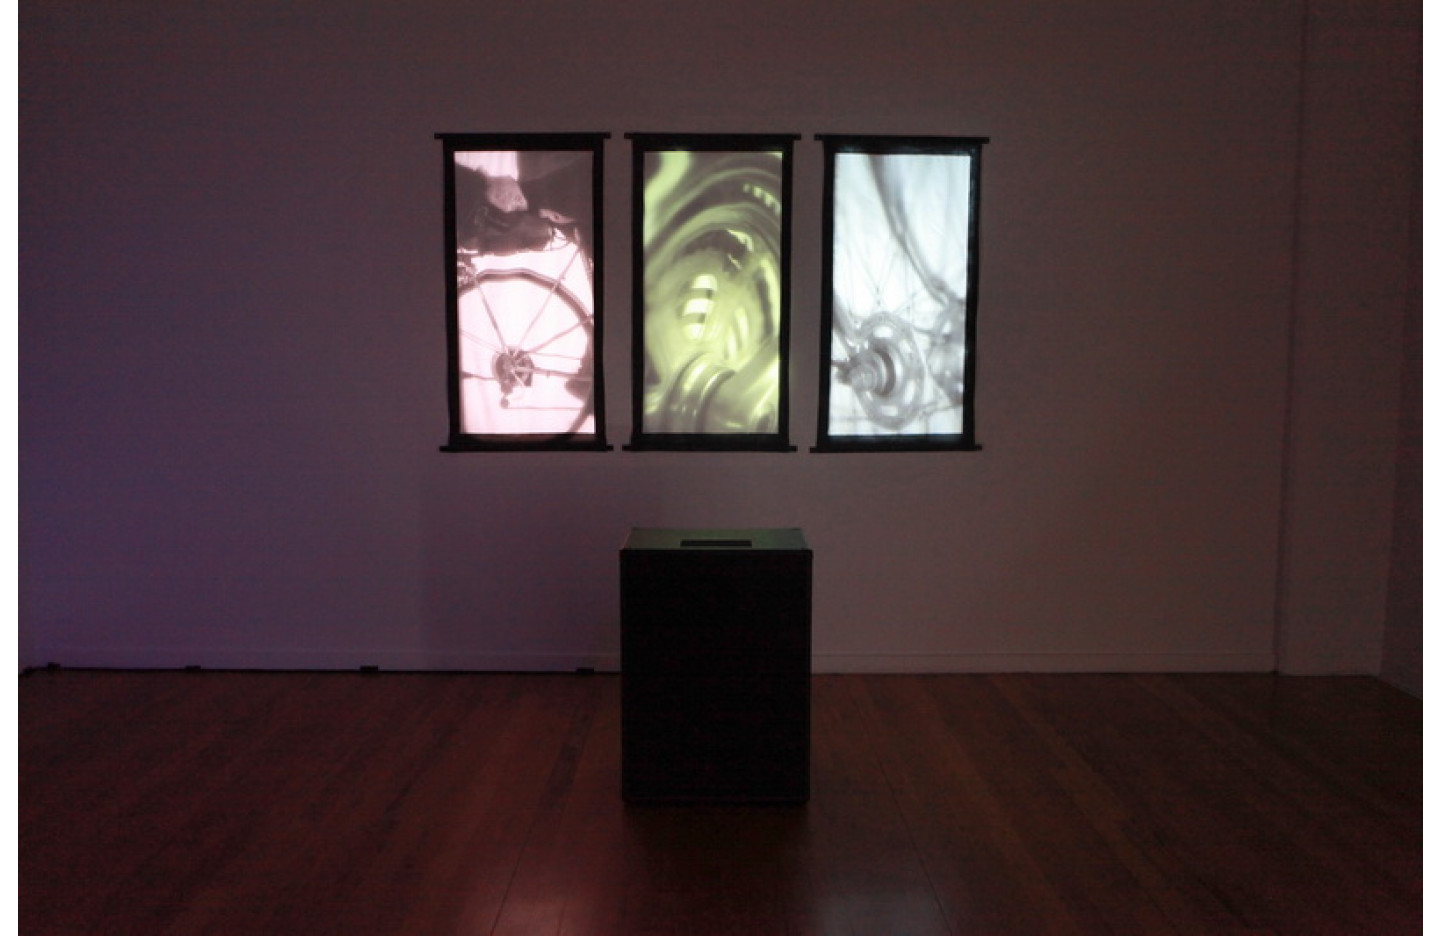 Moment of Inertia, triptych video projection on cloth. Dan Inglis (with Jeremy Mayall).